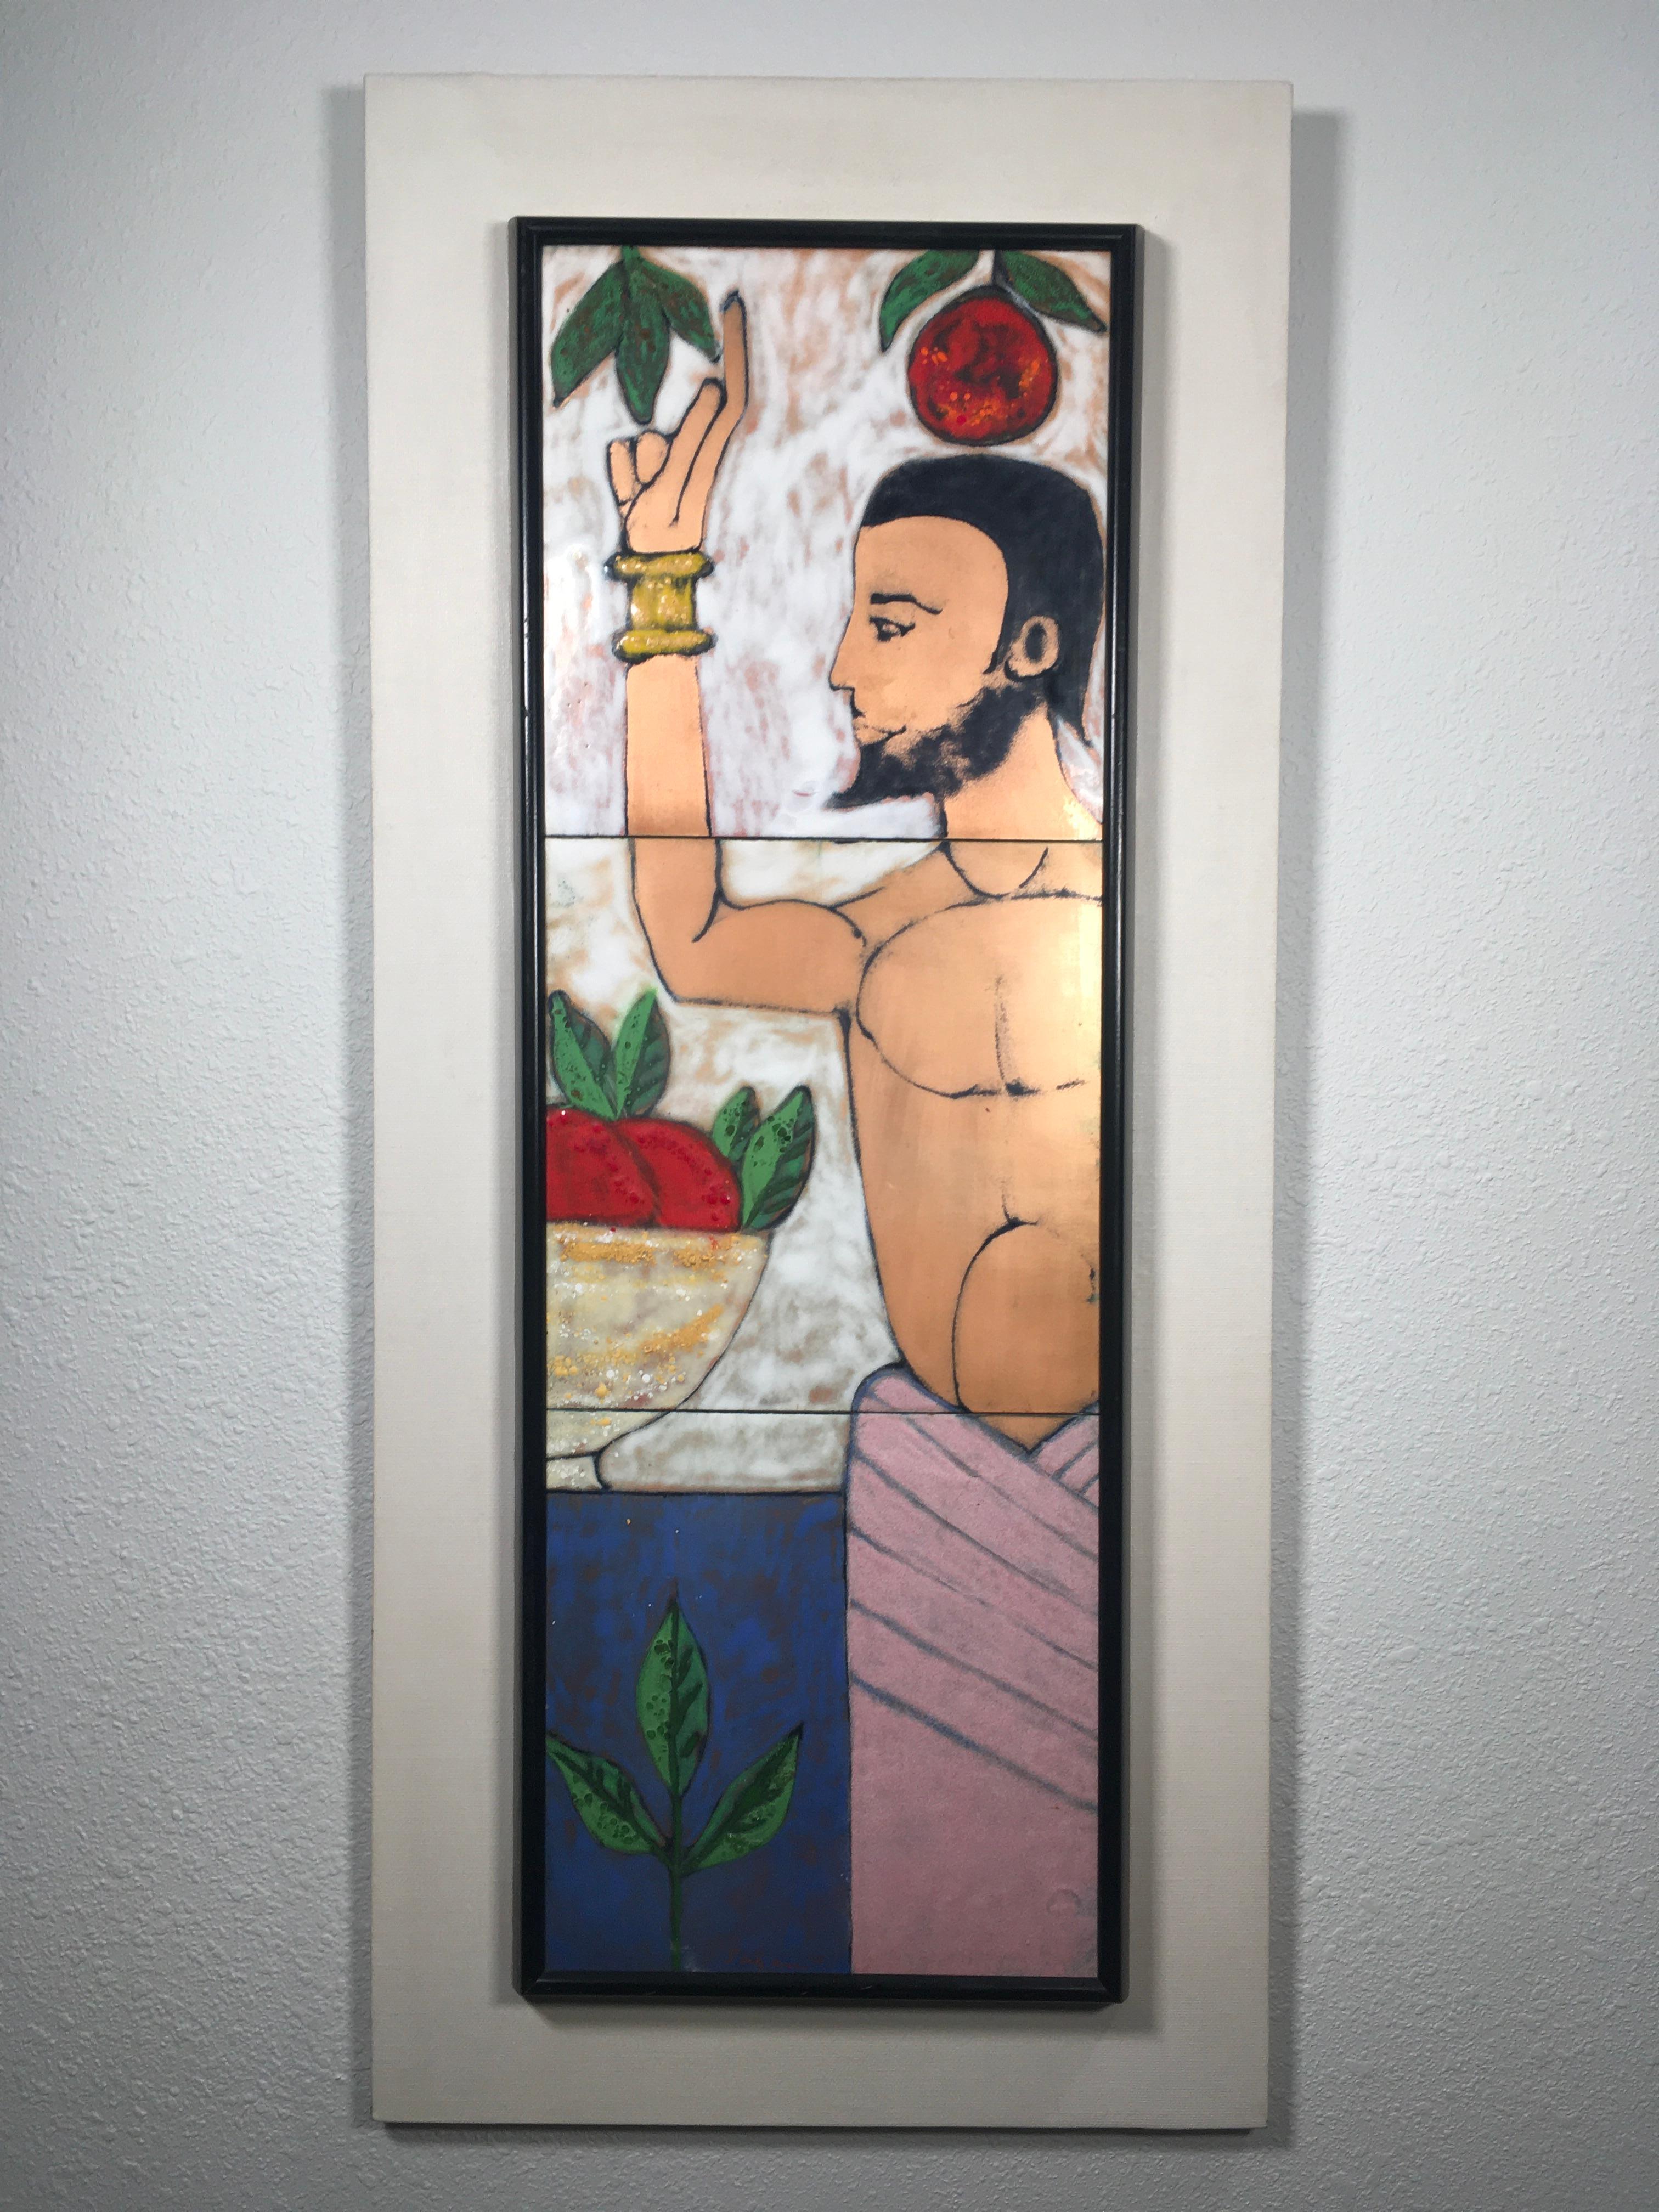 This 43.75" x 19.5" work incorporates three painted metal panels on a white wood base depicting a simplistic rendering of Adam from the biblical story of 'Adam & Eve'. The figure is slightly cut off on the right edge of the work, with the majority